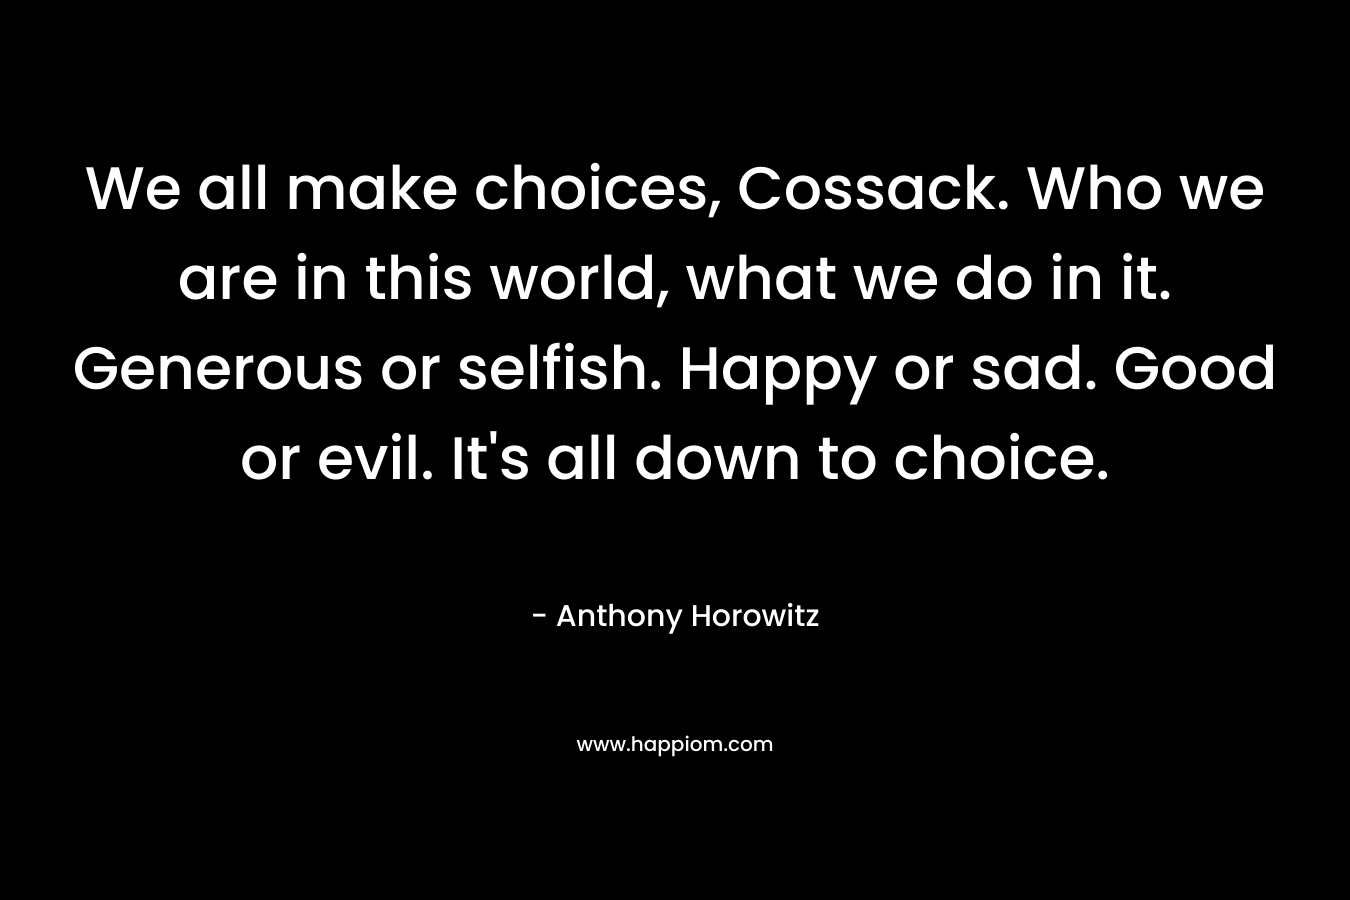 We all make choices, Cossack. Who we are in this world, what we do in it. Generous or selfish. Happy or sad. Good or evil. It’s all down to choice. – Anthony Horowitz